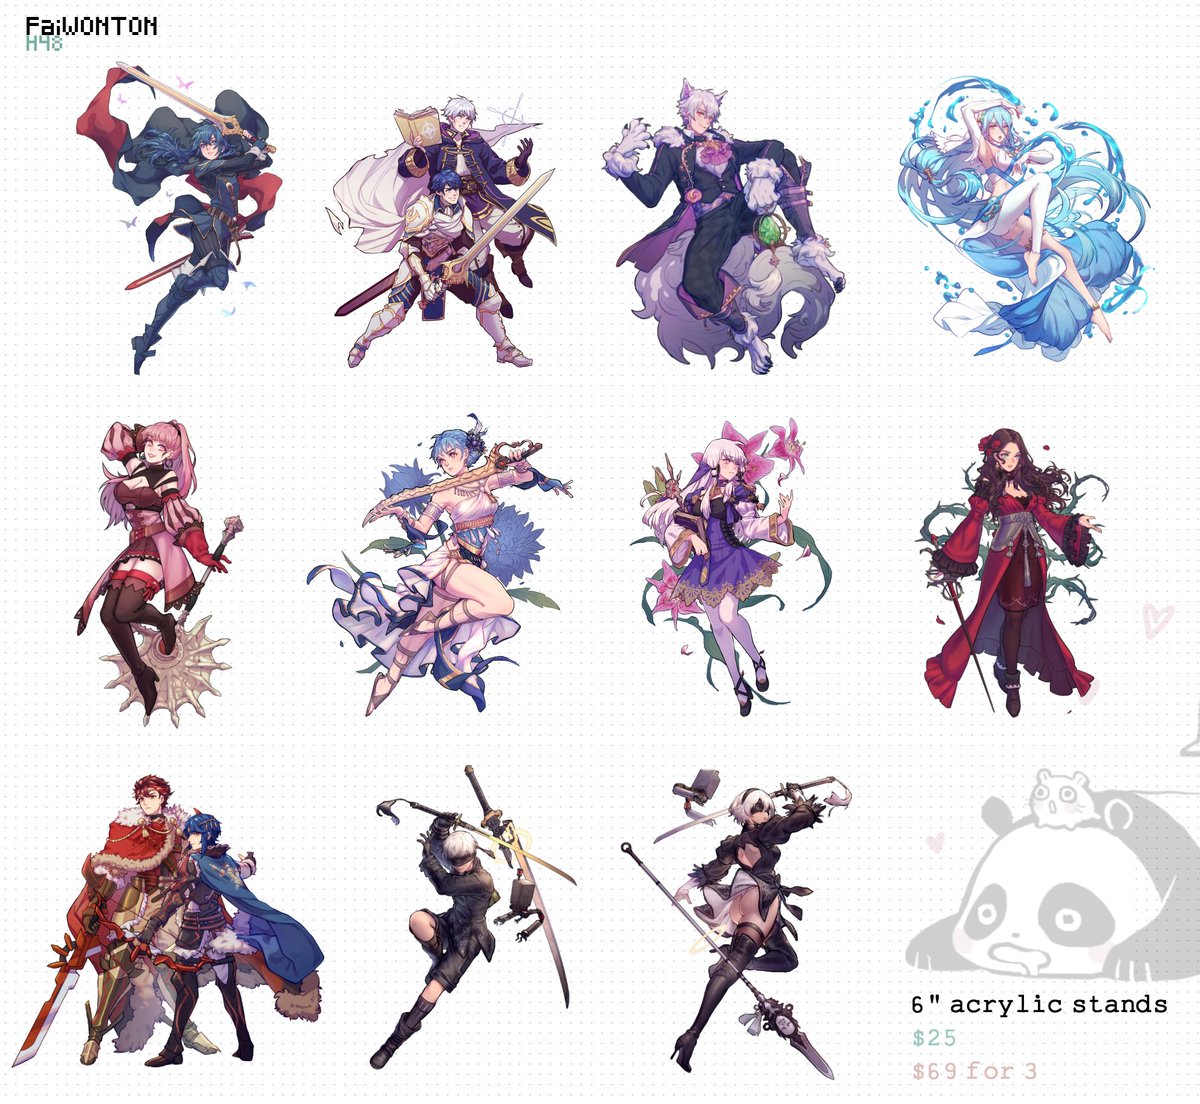 Prints and acrylic stands! We are out to earn the title of The Fire Emblem table again (jk)